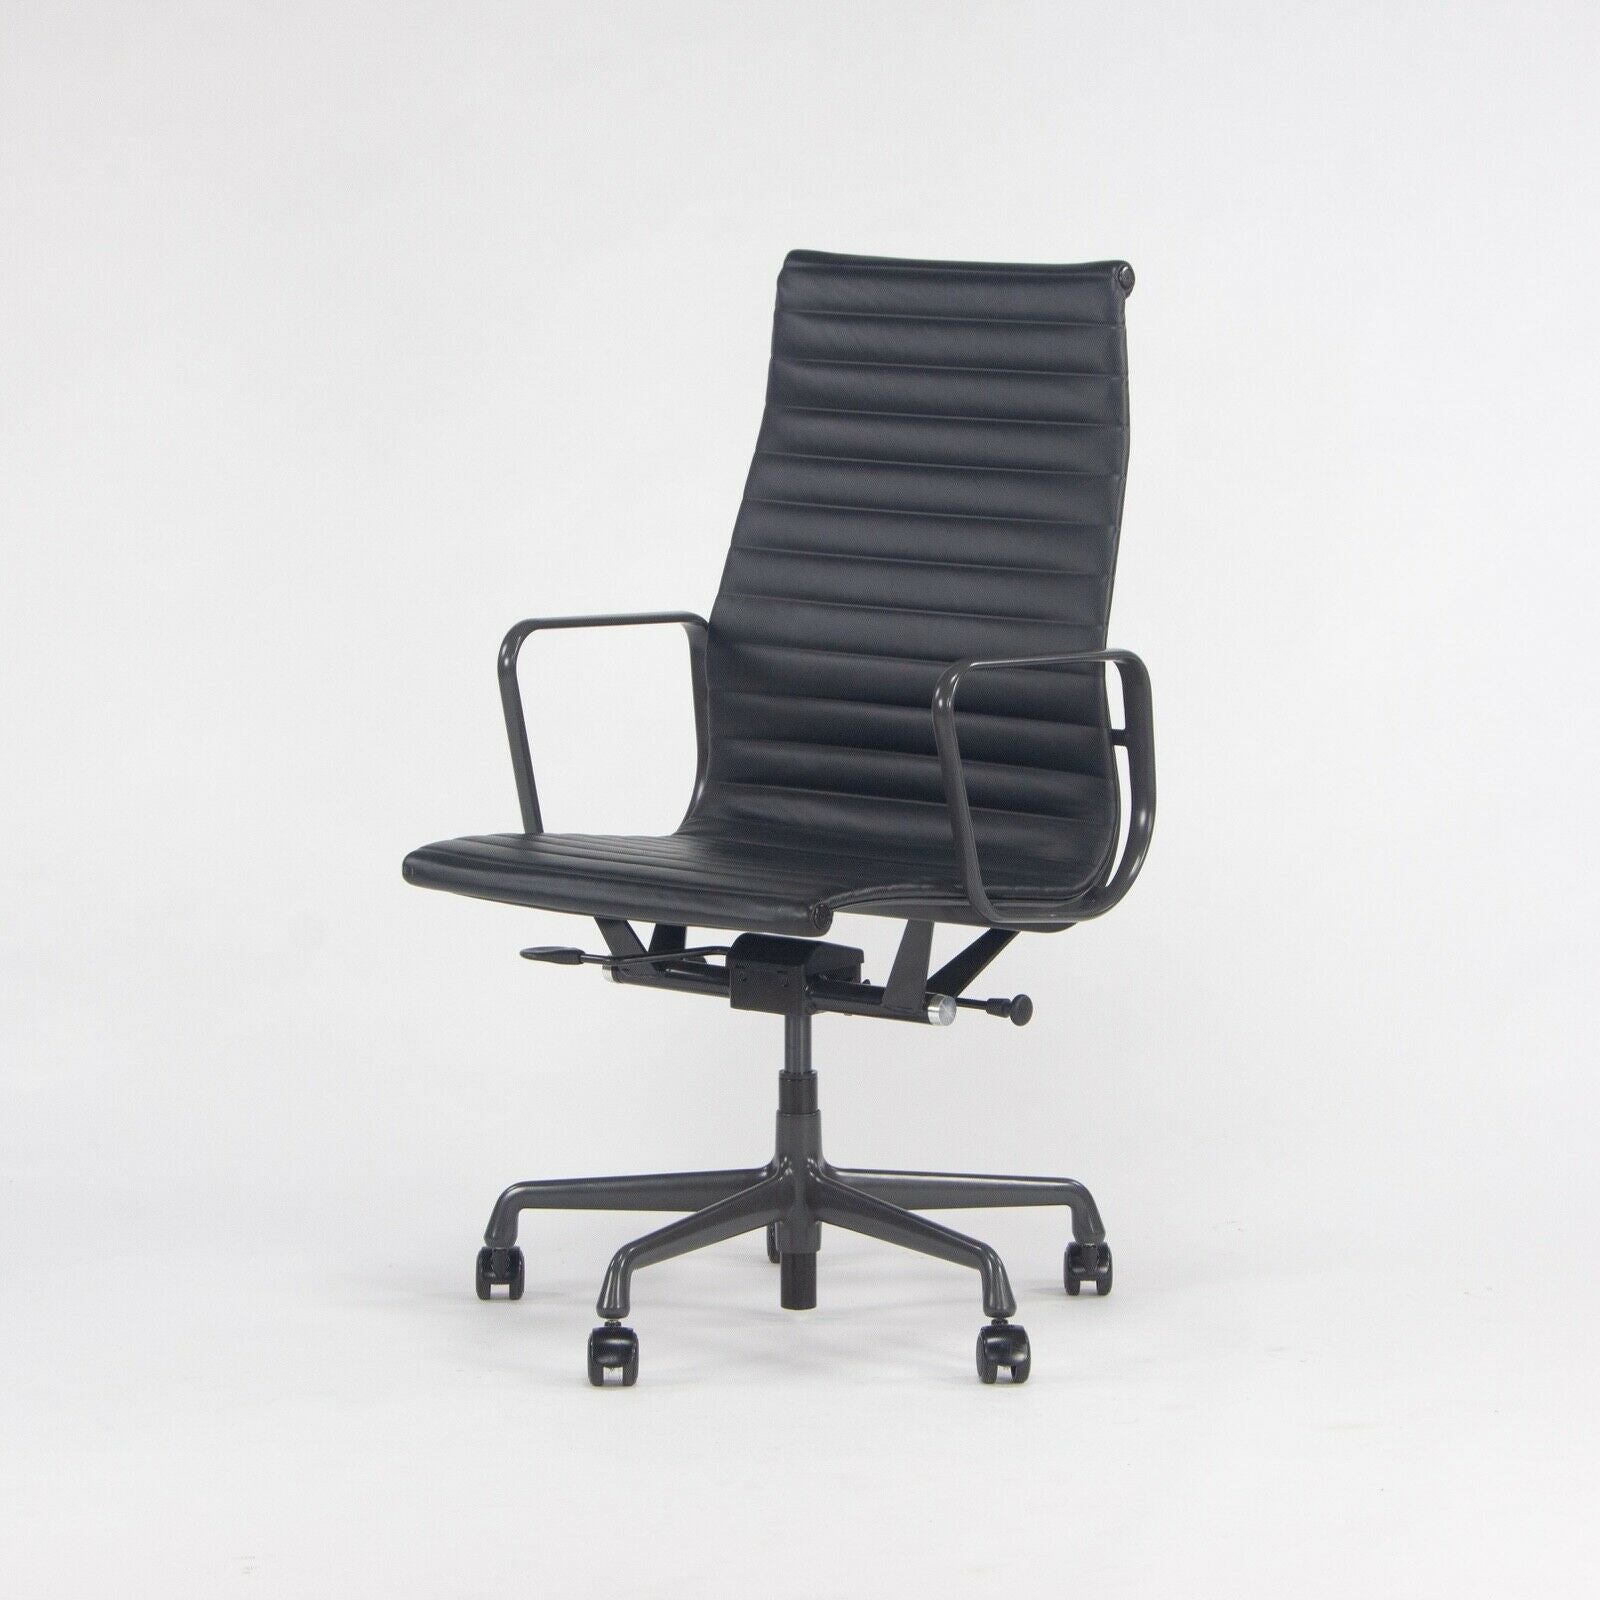 SOLD 2018 Herman Miller Eames Aluminum Group Executive Desk Chair in Black Leather 7x